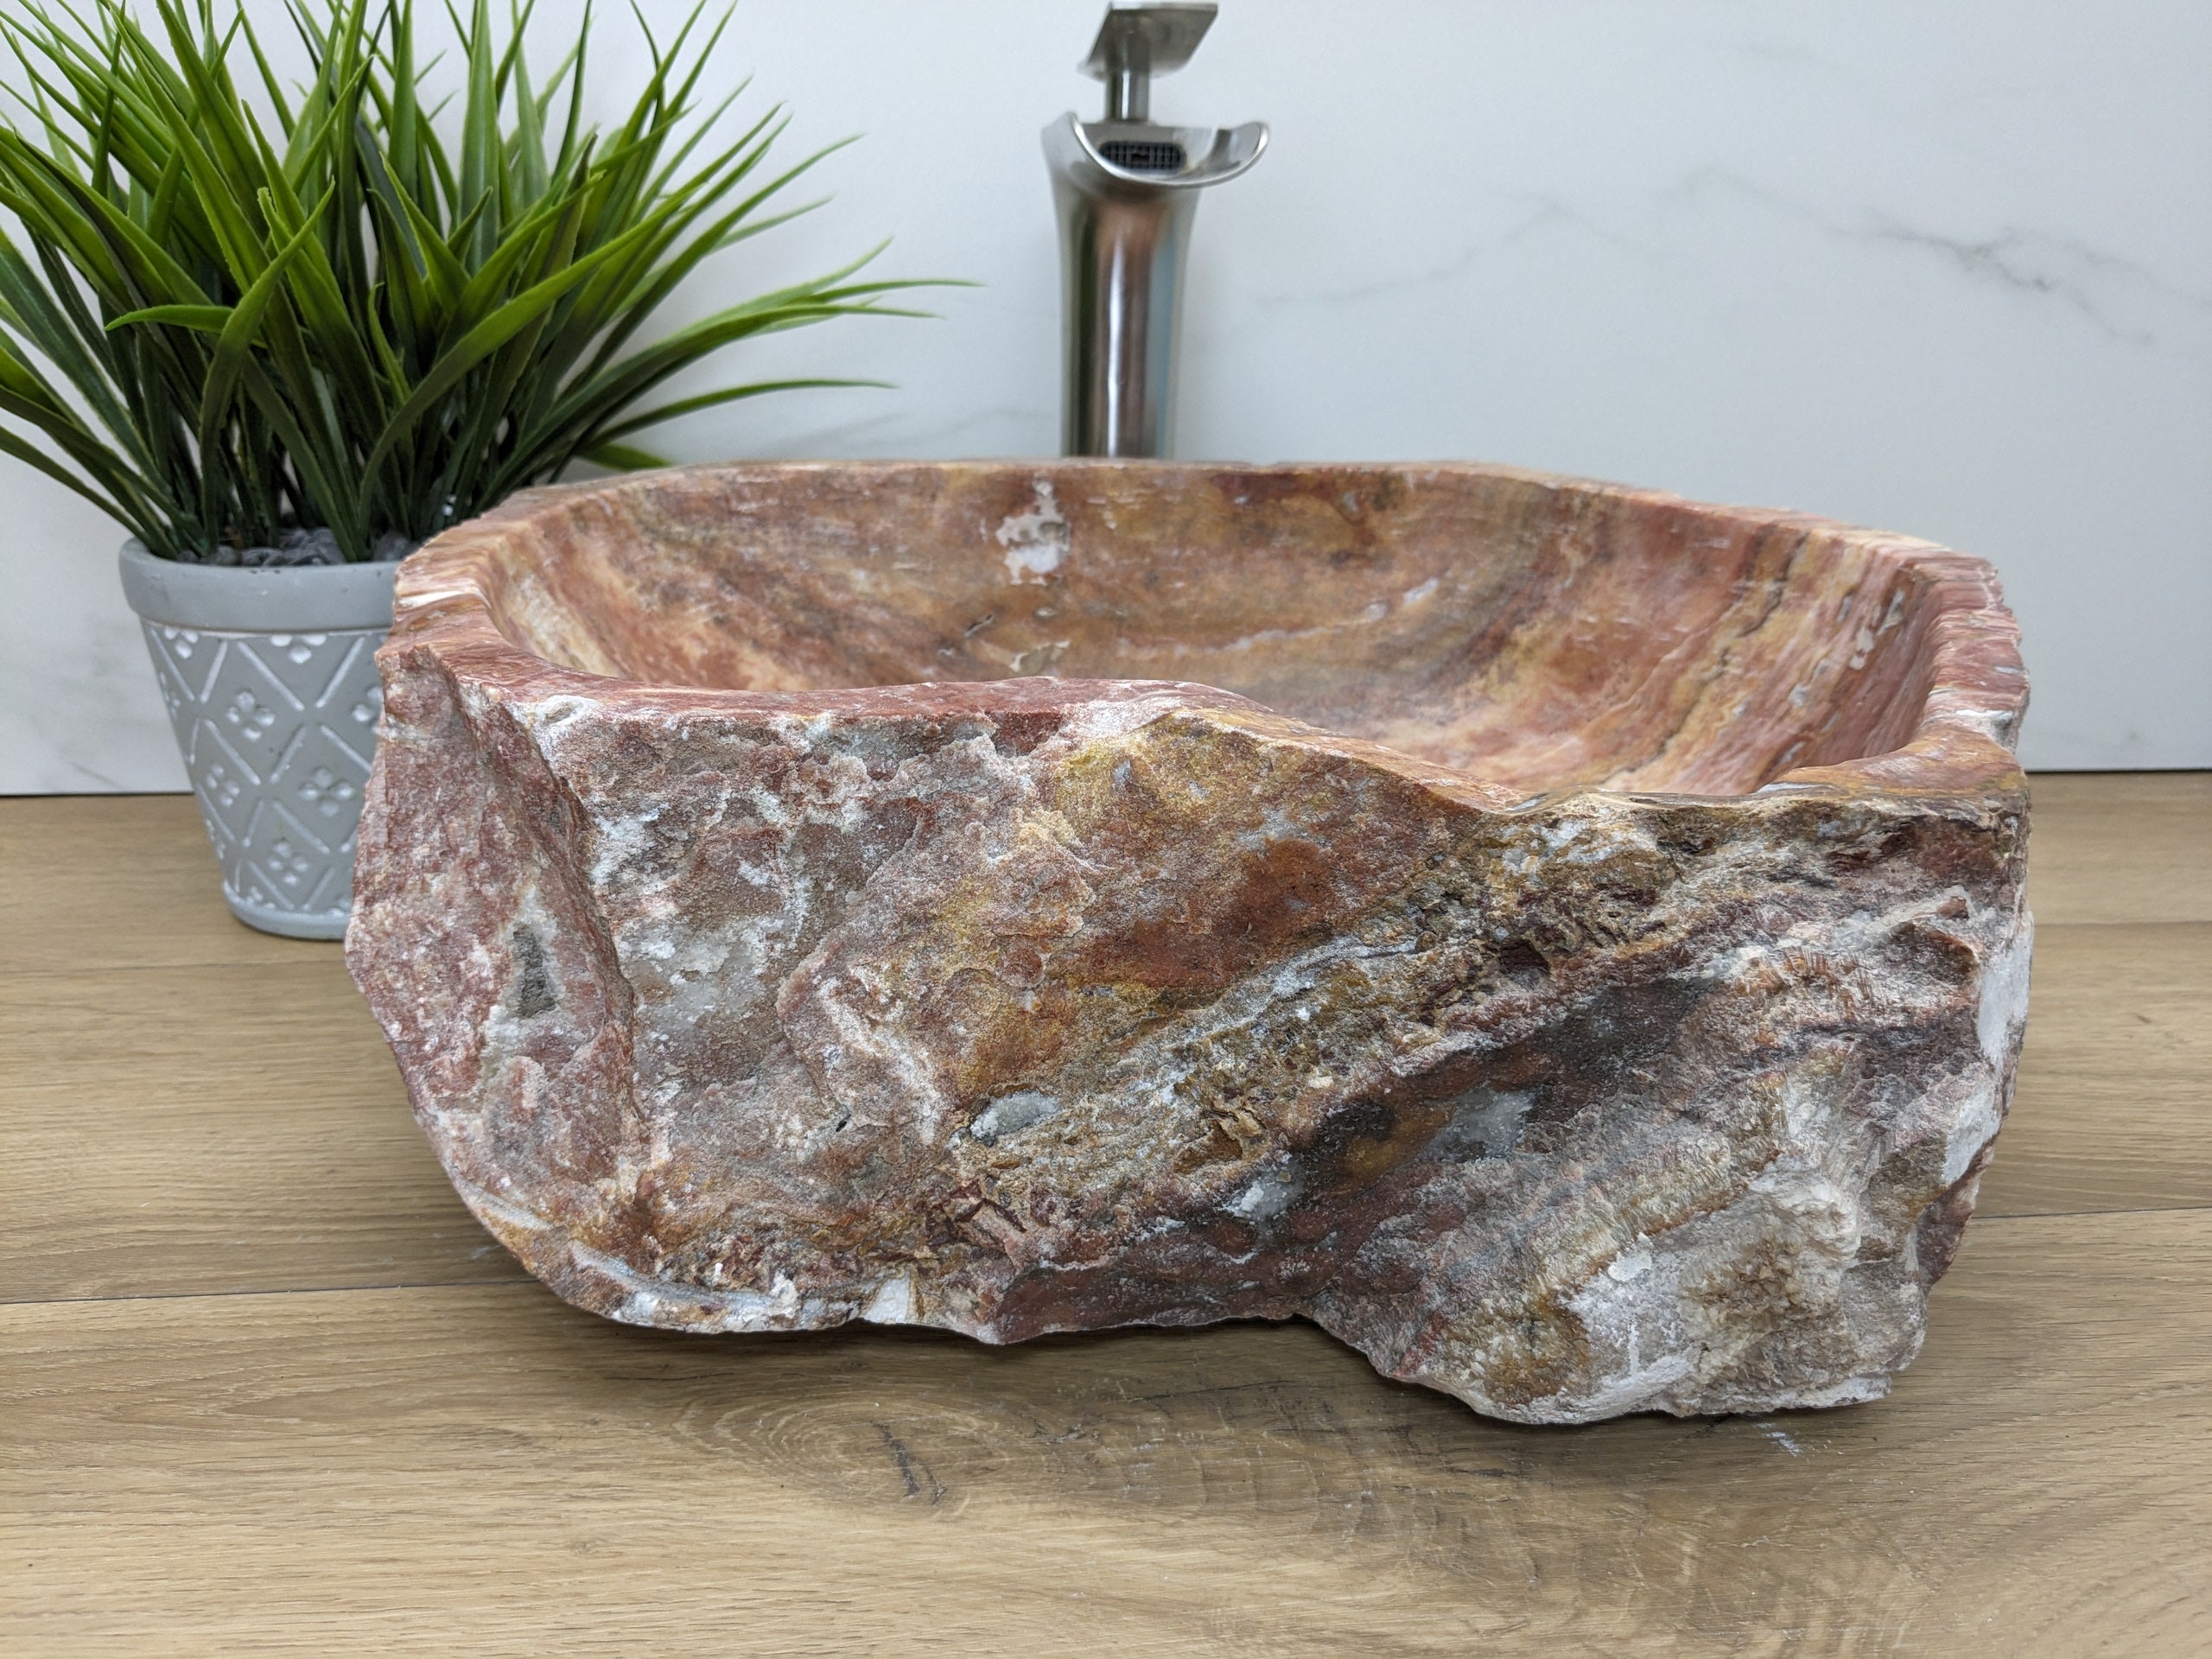 Pink and Tan Onyx Stone Vessel Bathroom Sink. Epoxy Sealant is available with fast shipping. Standard Drain Size. A beautiful work of rustic art. Handmade. Buy Now at www.felipeandgrace.com